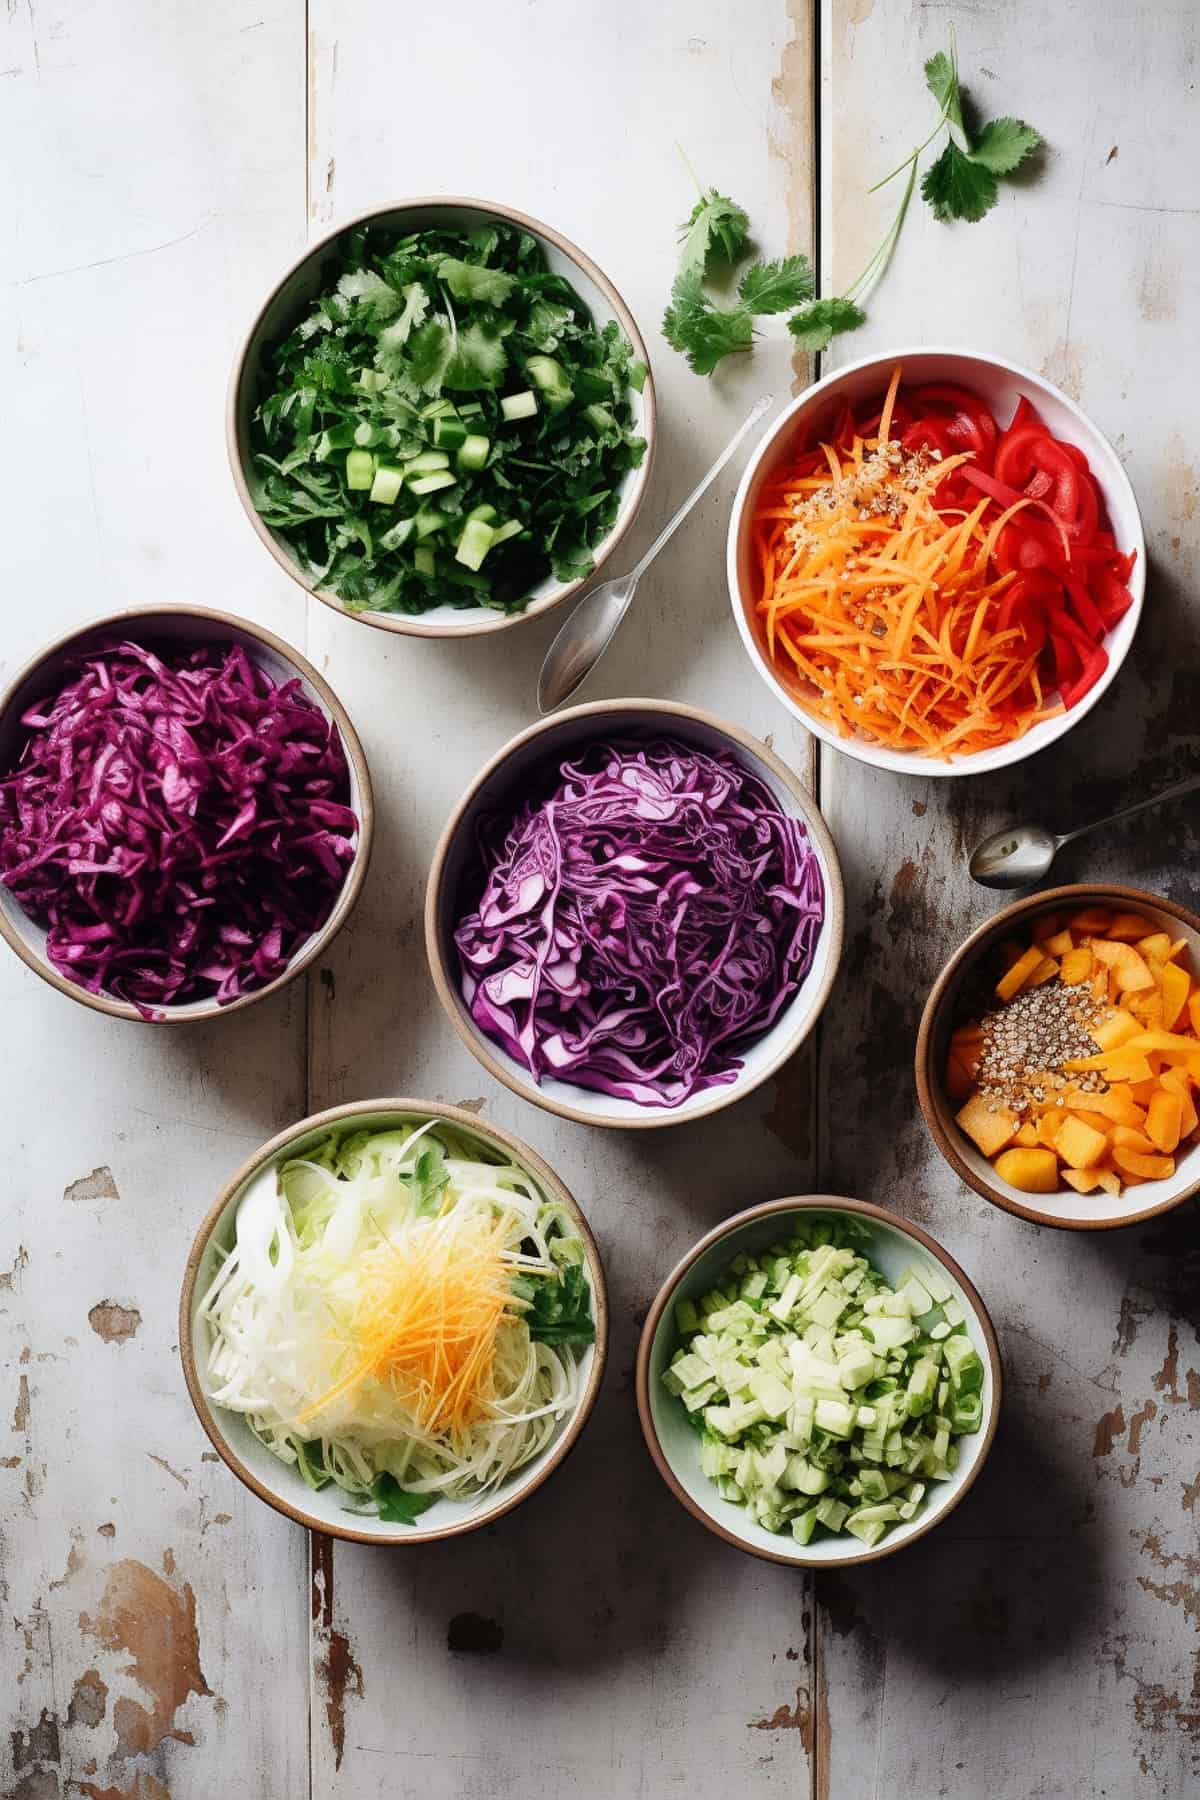 Ingredients for coleslaw in a white table.